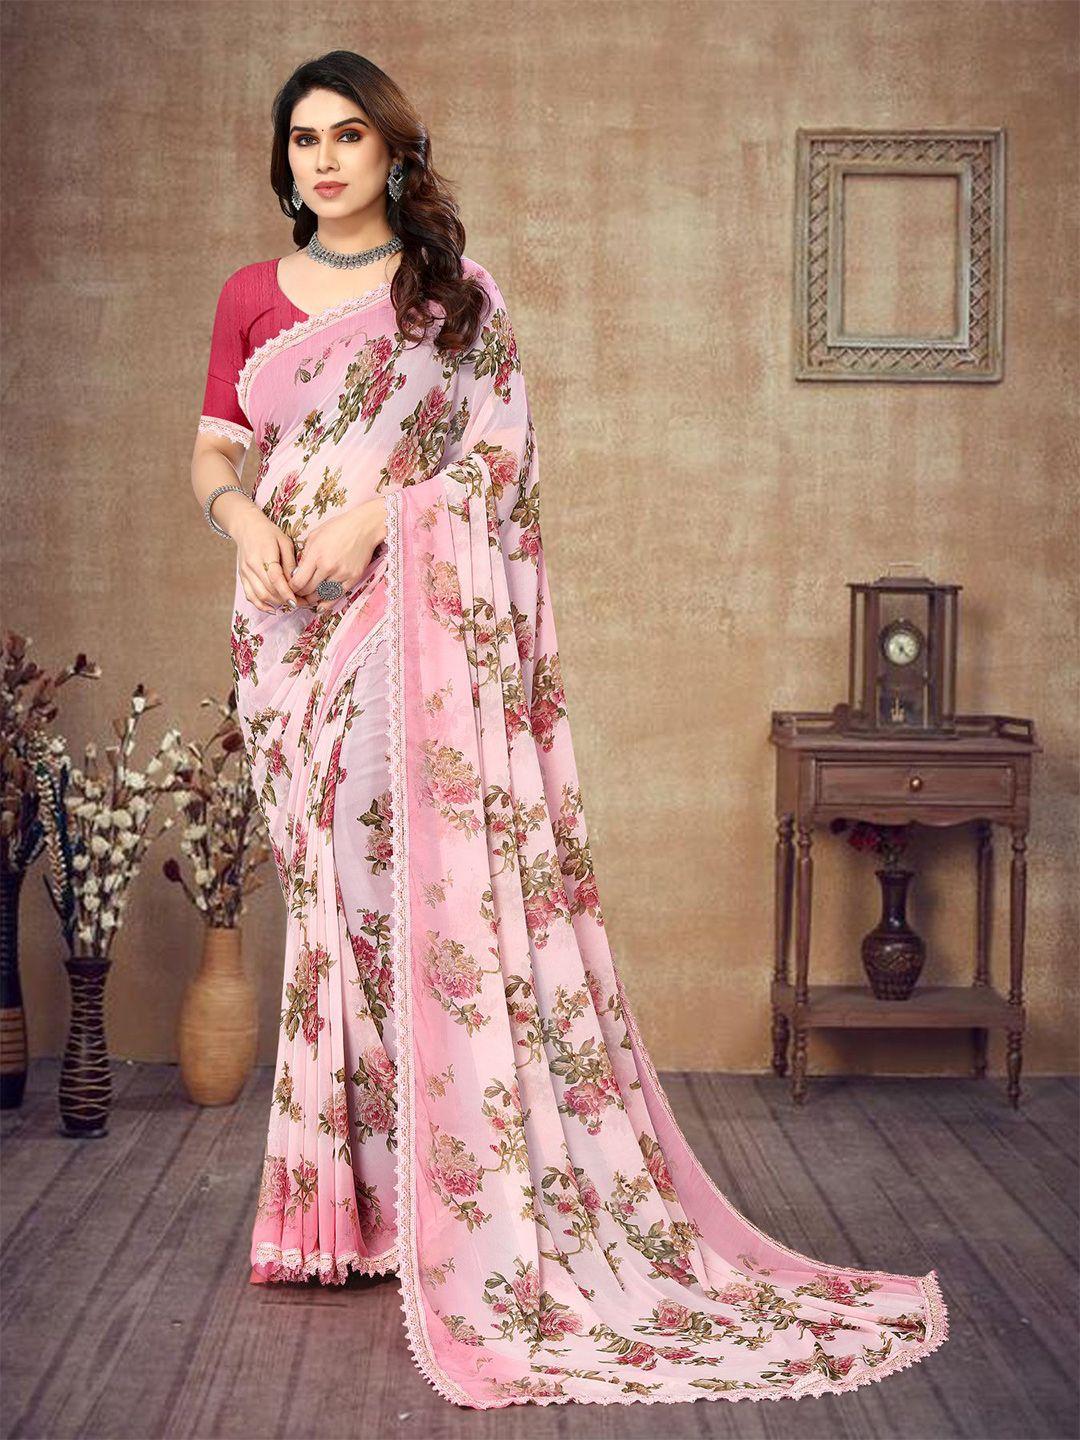 vairagee floral printed lace-up poly georgette saree